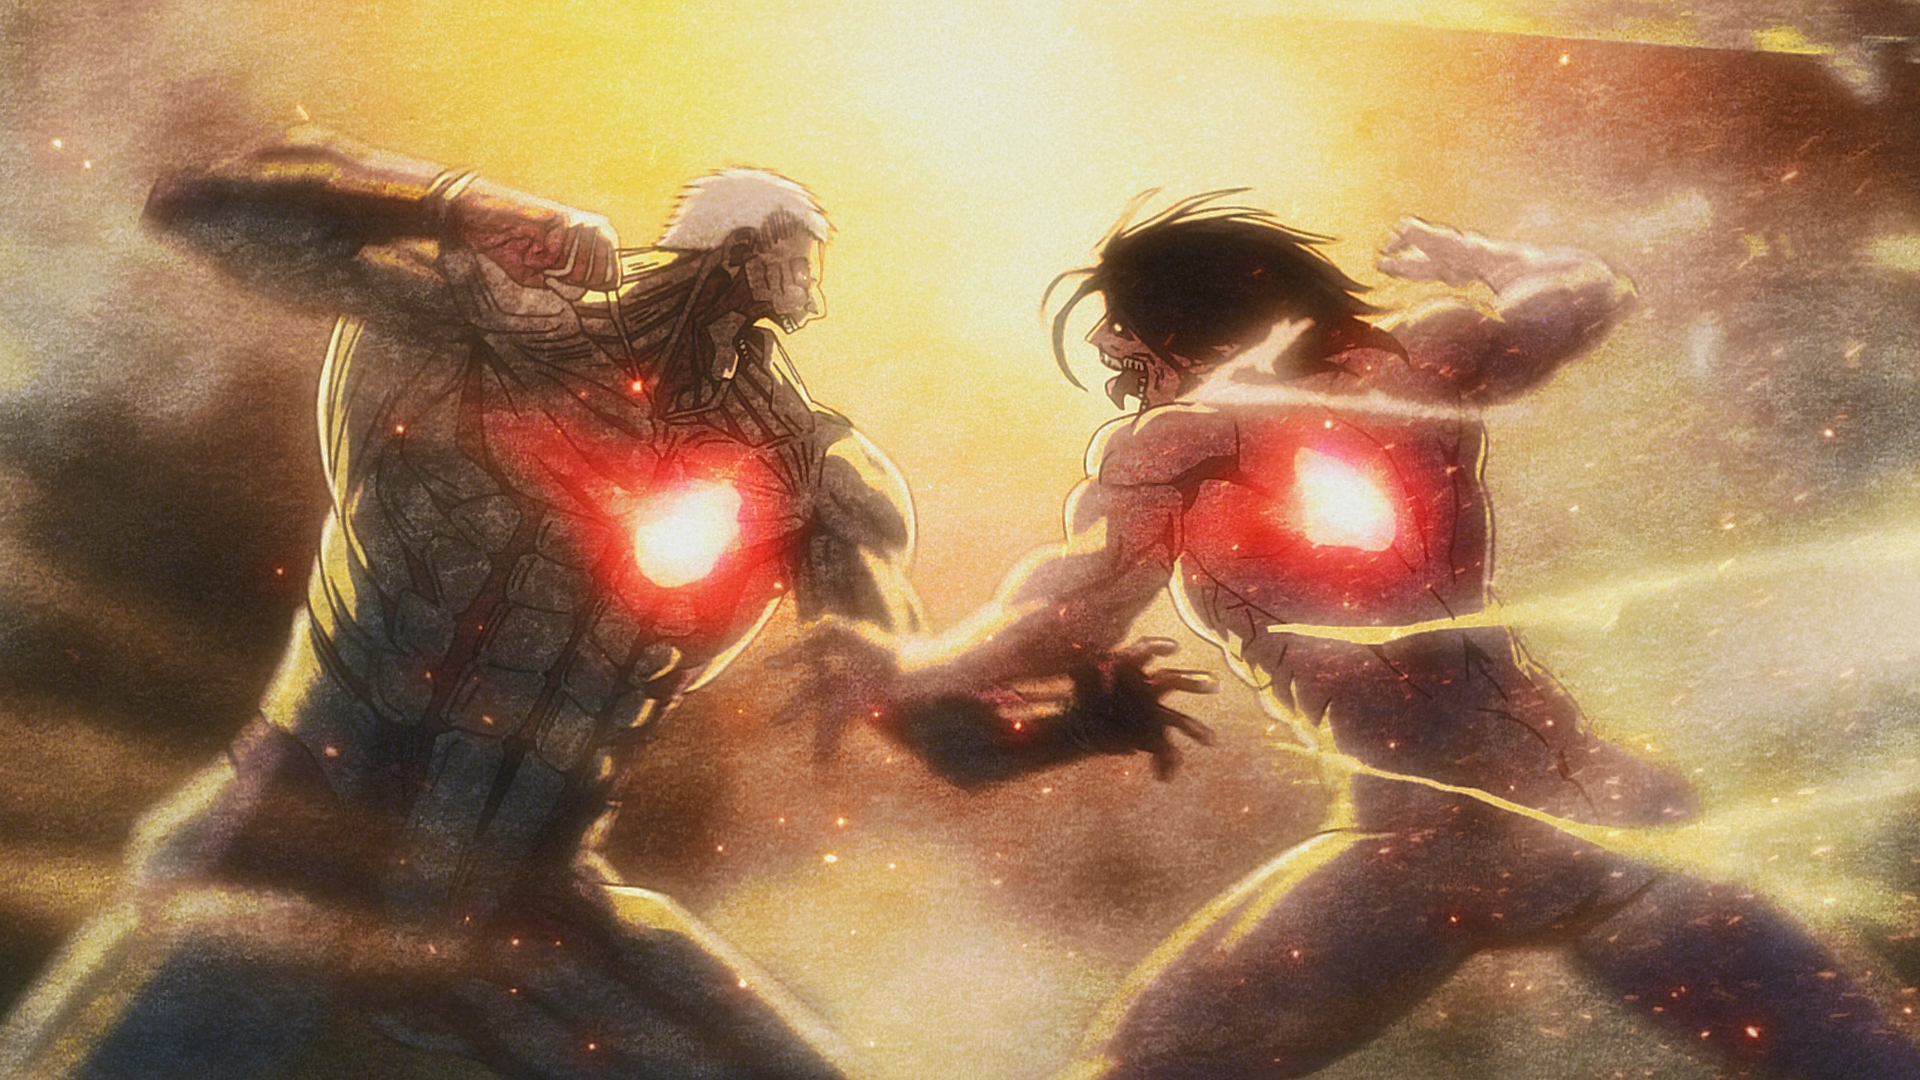 Heres Everything You Need to Know About Attack on Titan Anime Series   News18